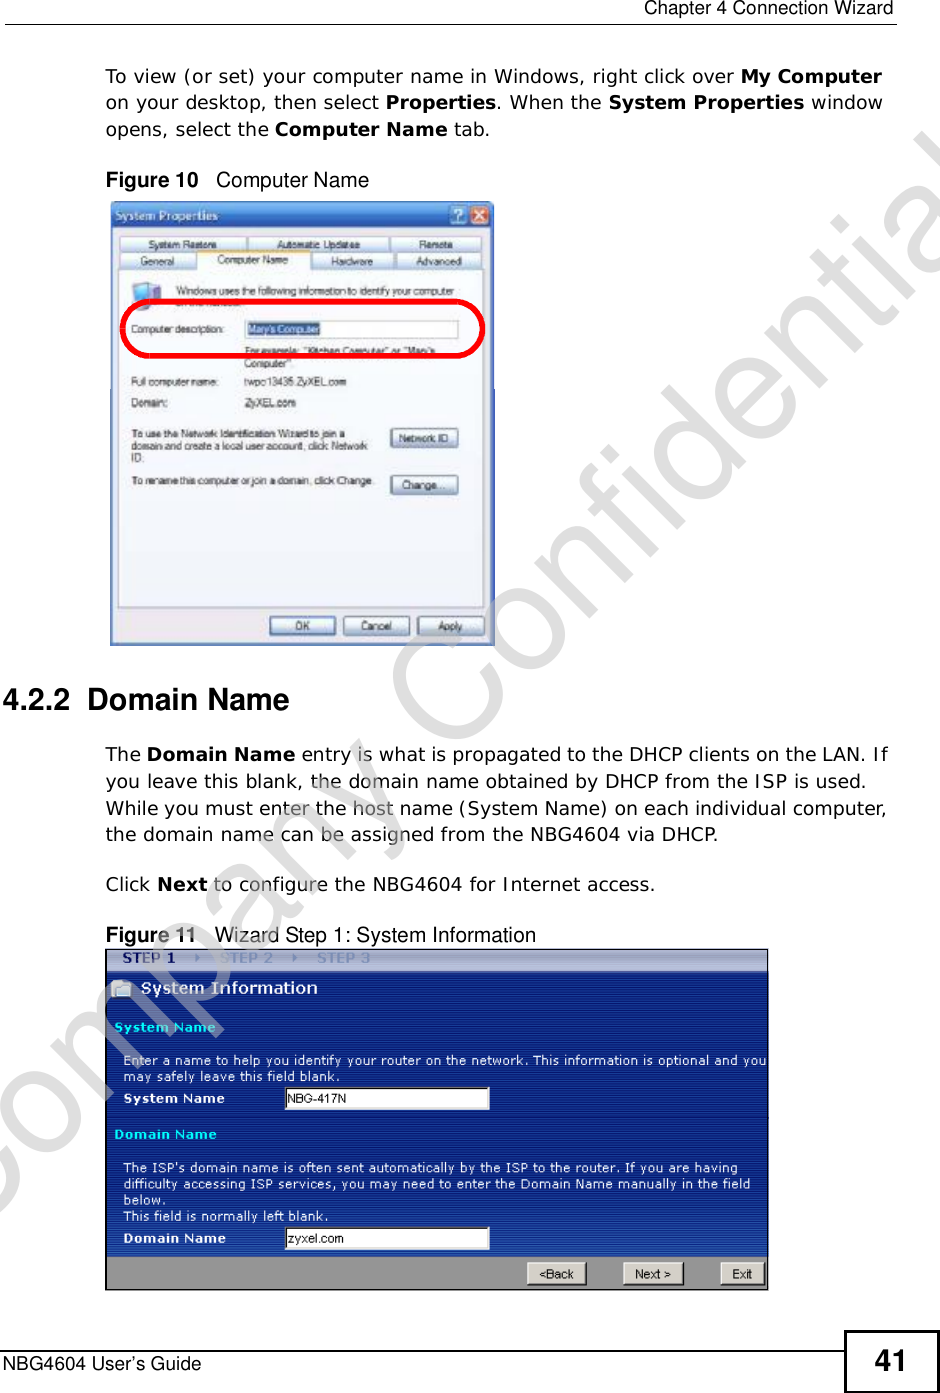  Chapter 4Connection WizardNBG4604 User’s Guide 41To view (or set) your computer name in Windows, right click over My Computeron your desktop, then select Properties. When the System Properties window opens, select the Computer Name tab.Figure 10   Computer Name4.2.2  Domain NameThe Domain Name entry is what is propagated to the DHCP clients on the LAN. If you leave this blank, the domain name obtained by DHCP from the ISP is used. While you must enter the host name (System Name) on each individual computer, the domain name can be assigned from the NBG4604 via DHCP.Click Next to configure the NBG4604 for Internet access.Figure 11   Wizard Step 1: System InformationCompany Confidential